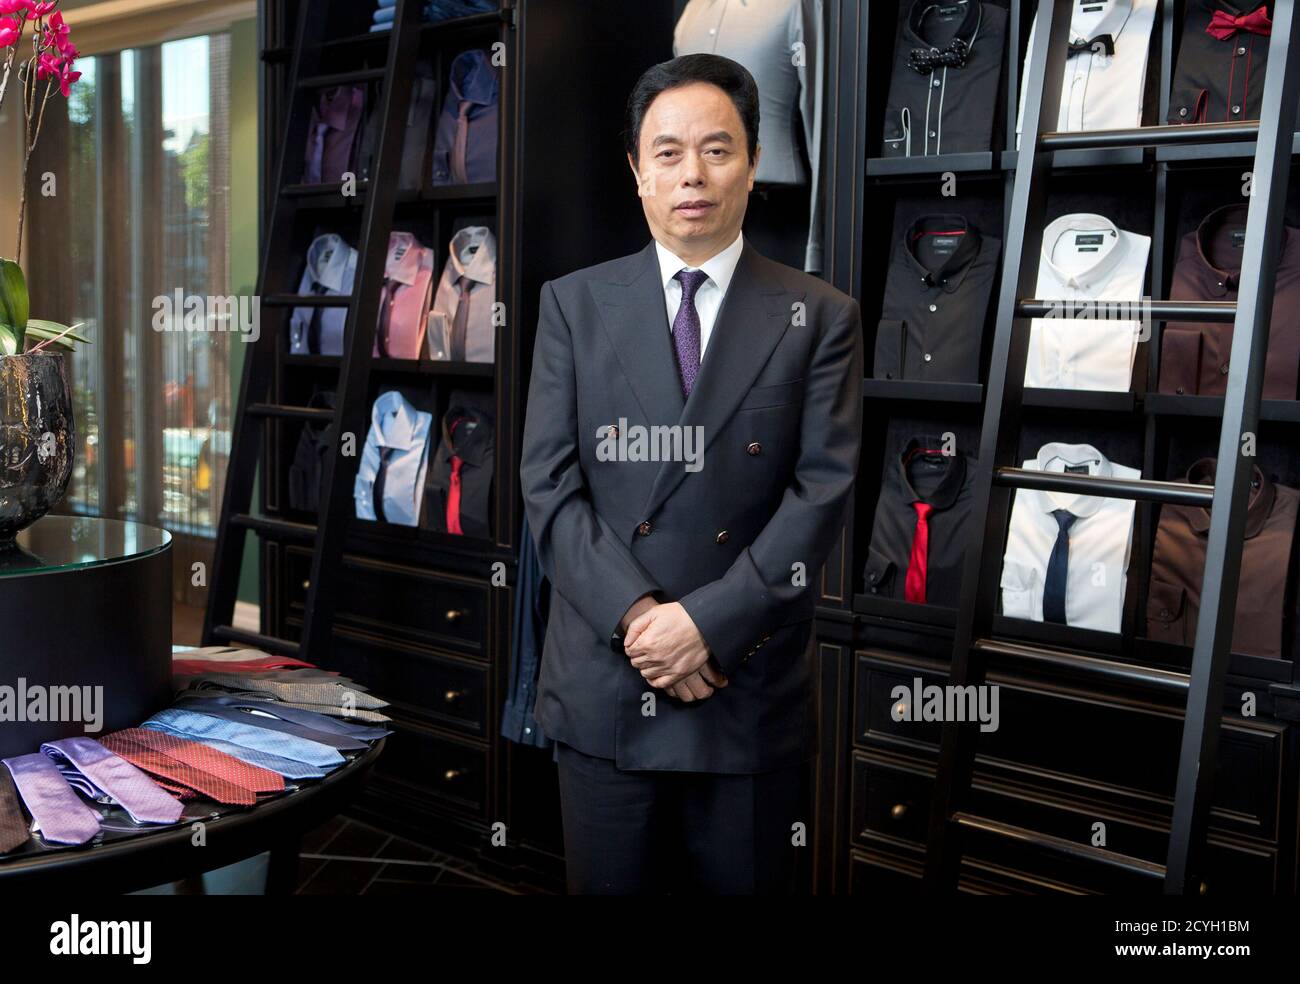 Bosideng founder and chairman Gao De Kang poses for photographs during the  opening of Bosideng's first overseas flagship store in London October 12,  2012. Bosideng International Holdings, China's largest maker and distributor